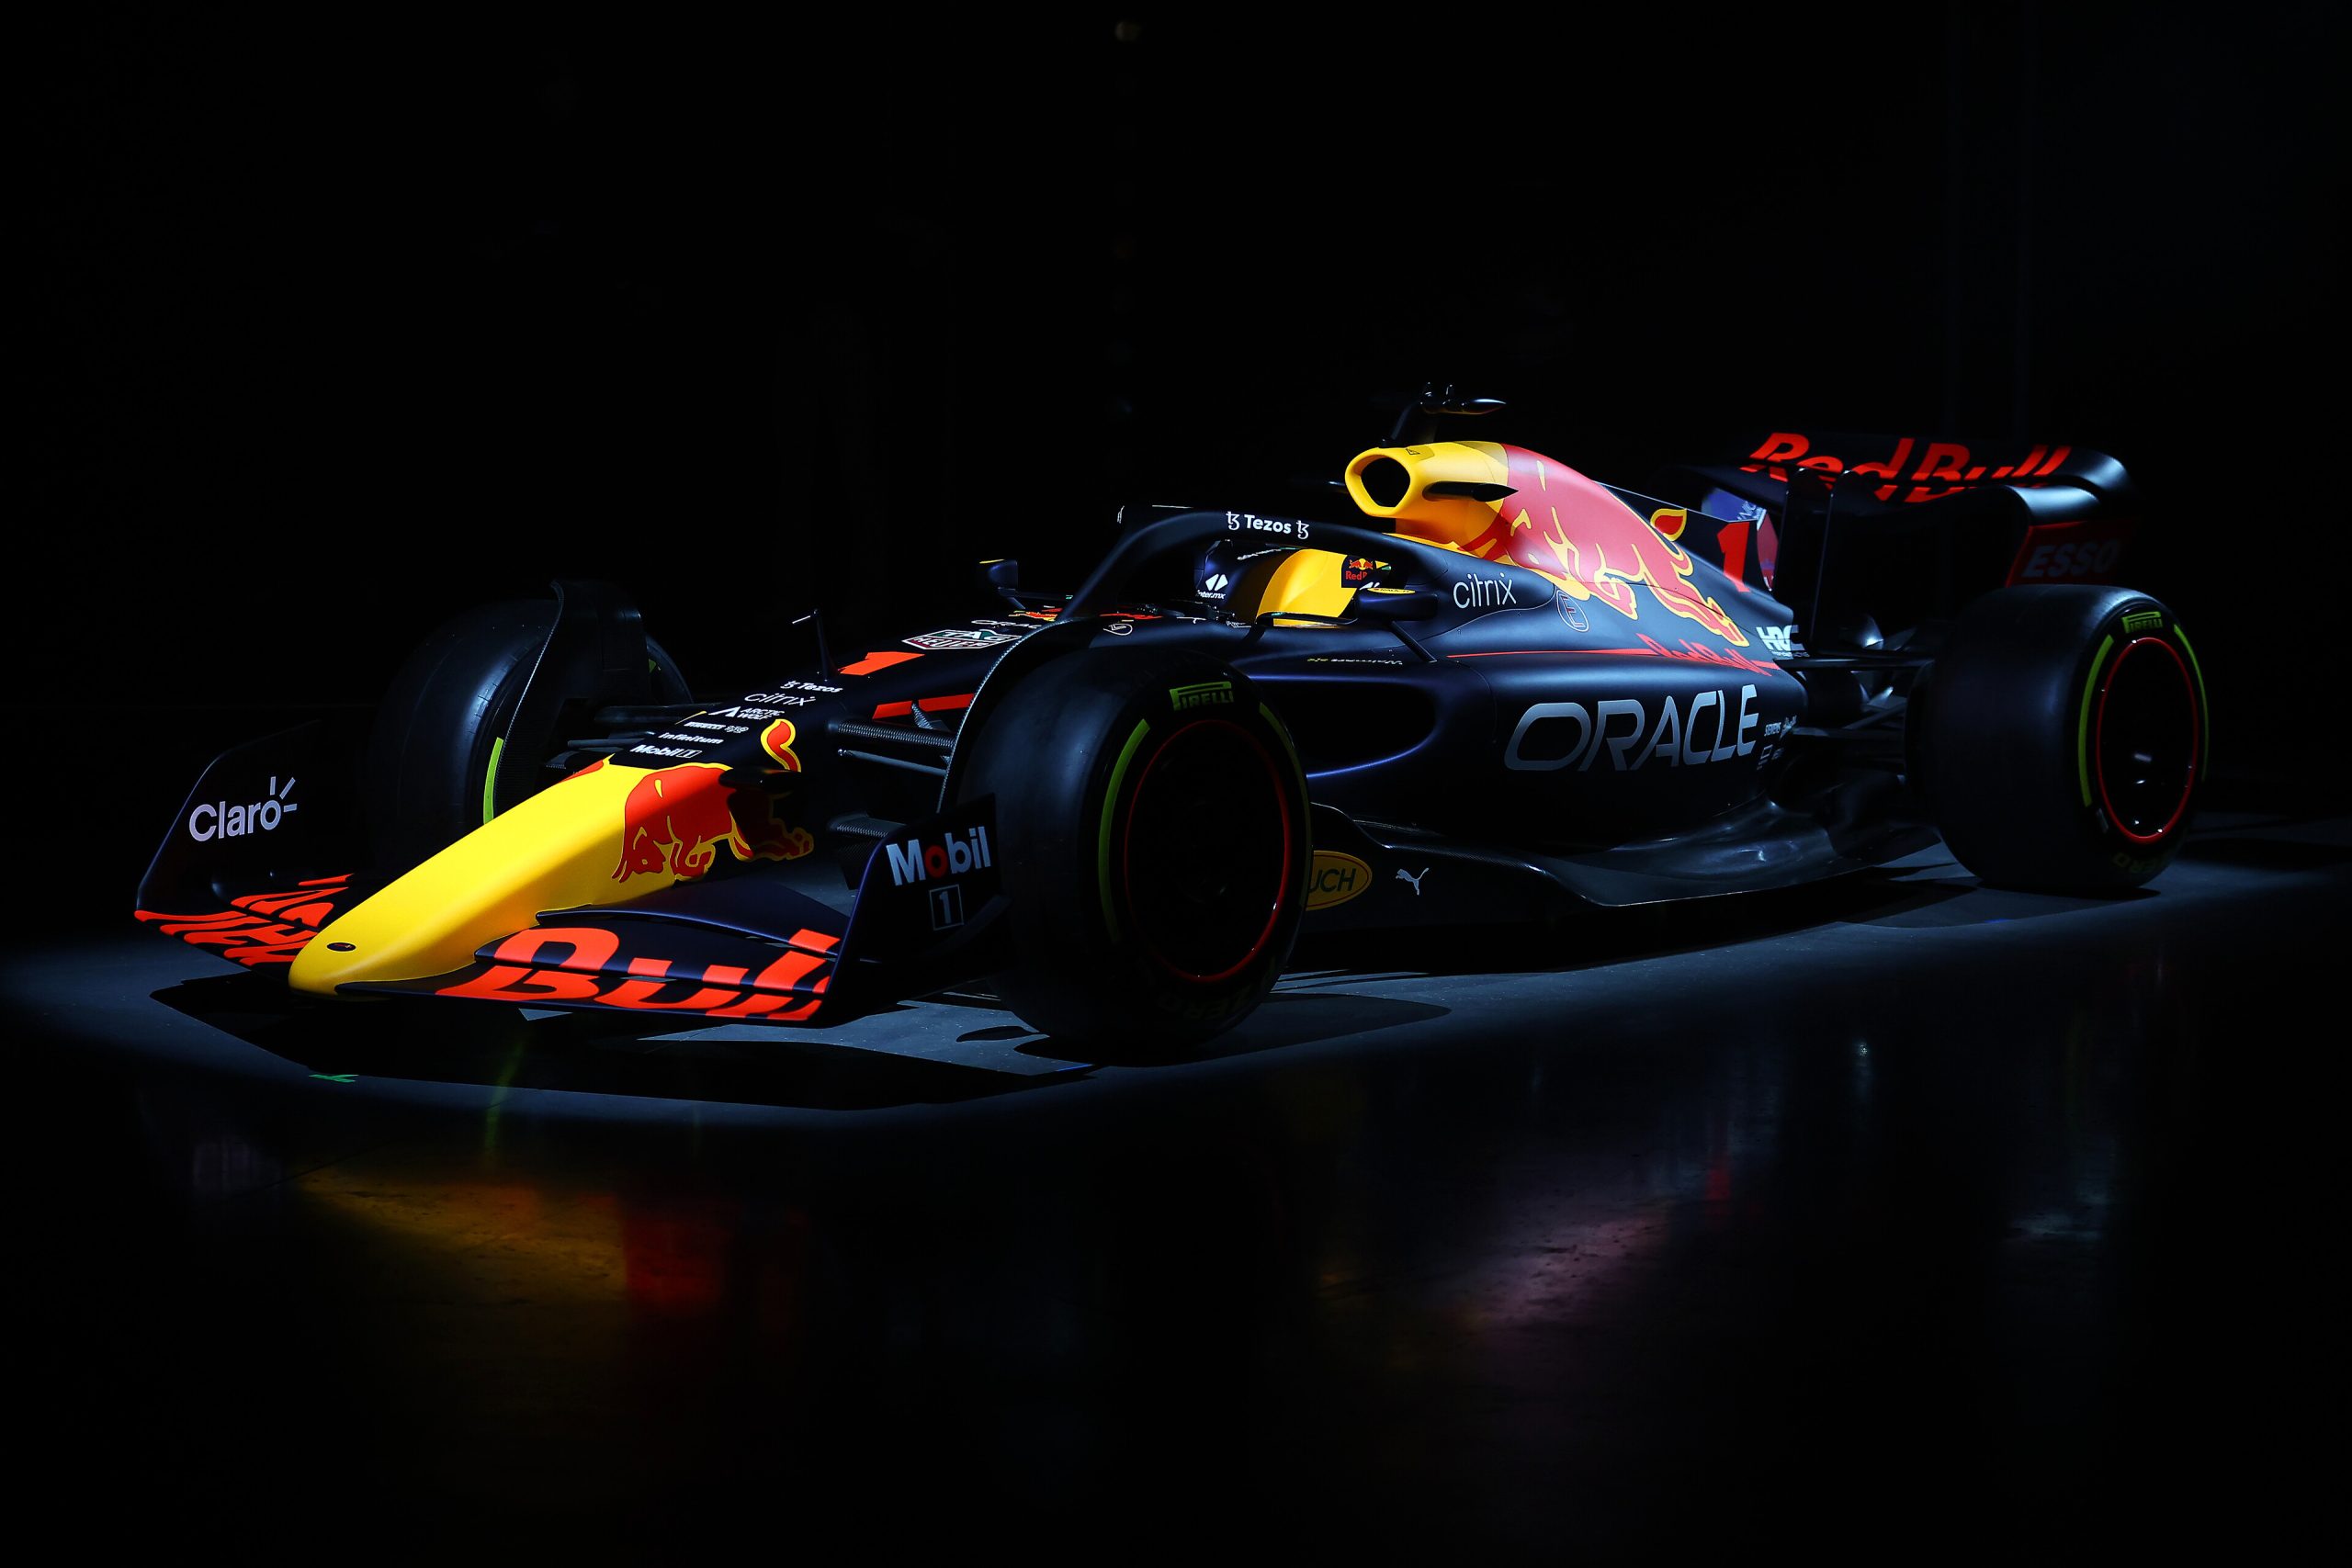 MILTON KEYNES, ENGLAND - JANUARY 26: The Red Bull Racing RB18 is pictured during the Red Bull Racing RB18 launch at Red Bull Racing Factory on January 26, 2022 in Milton Keynes, England. (Photo by Bryn Lennon/Getty Images) // Getty Images / Red Bull Content Pool // SI202202090248 // Usage for editorial use only //